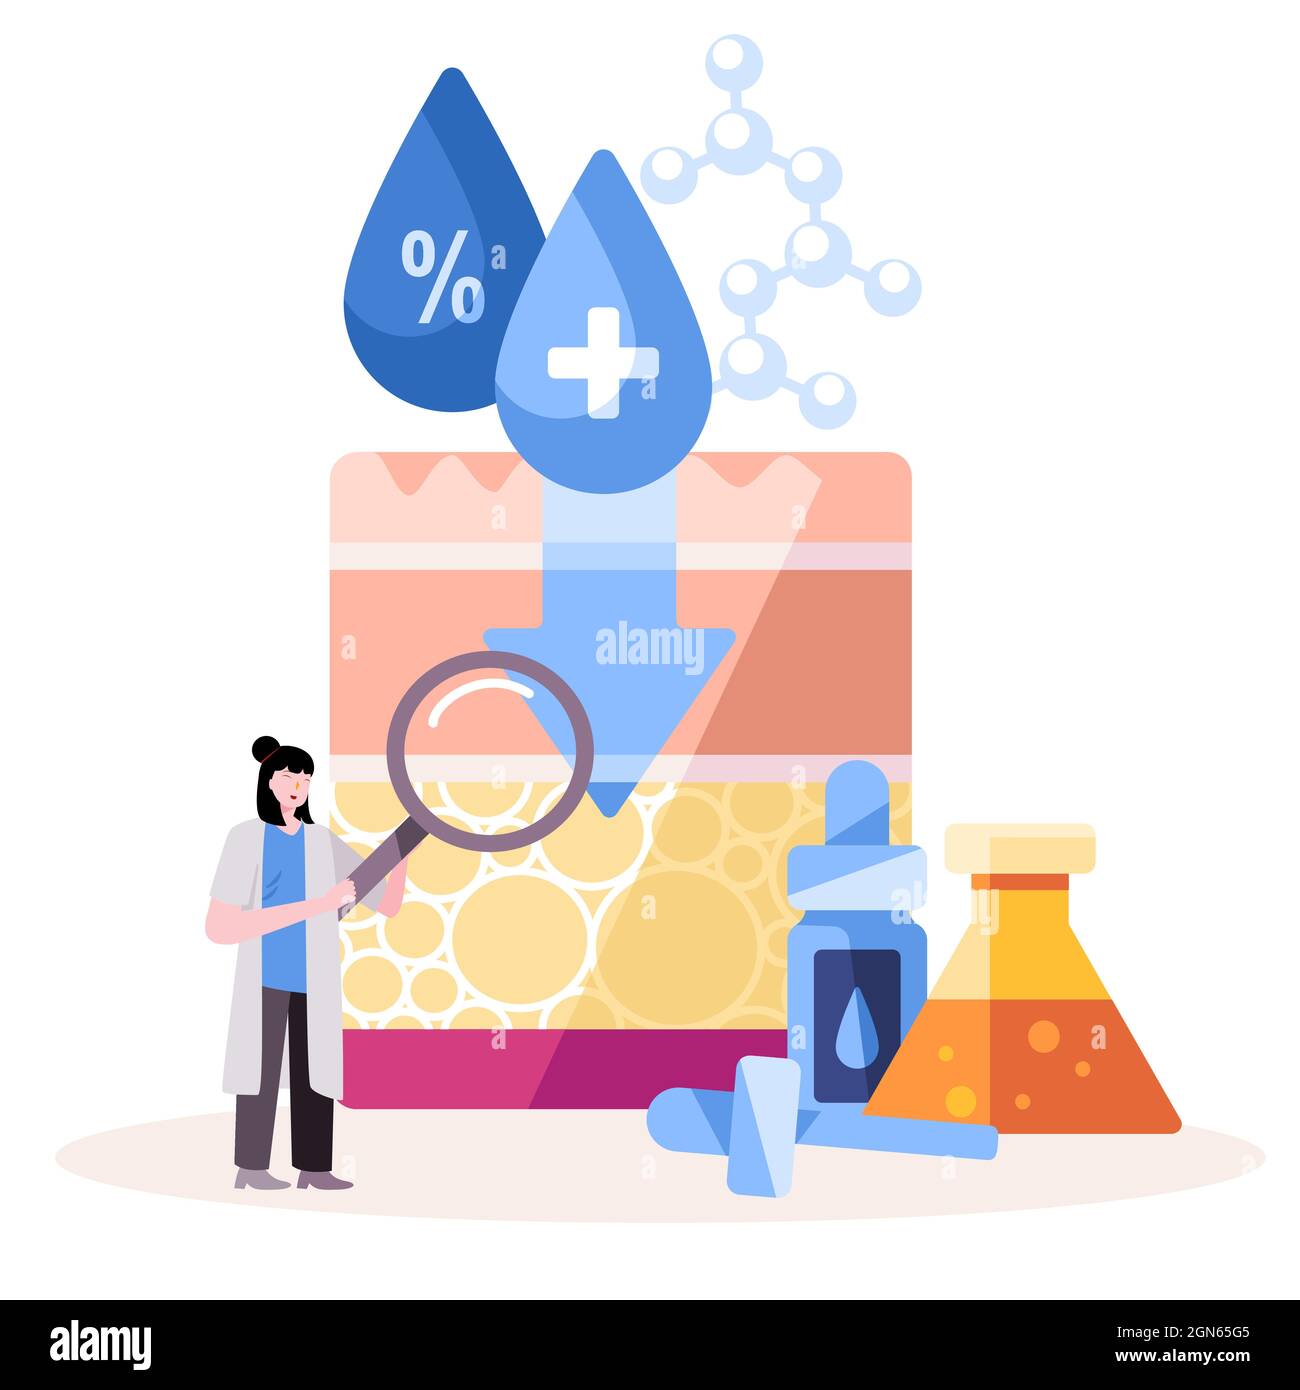 woman researcher is analyzing hyaluronic acid as serum moisturizer for skin elasticity and anti aging in her laboratory modern cartoon flat color Stock Vector